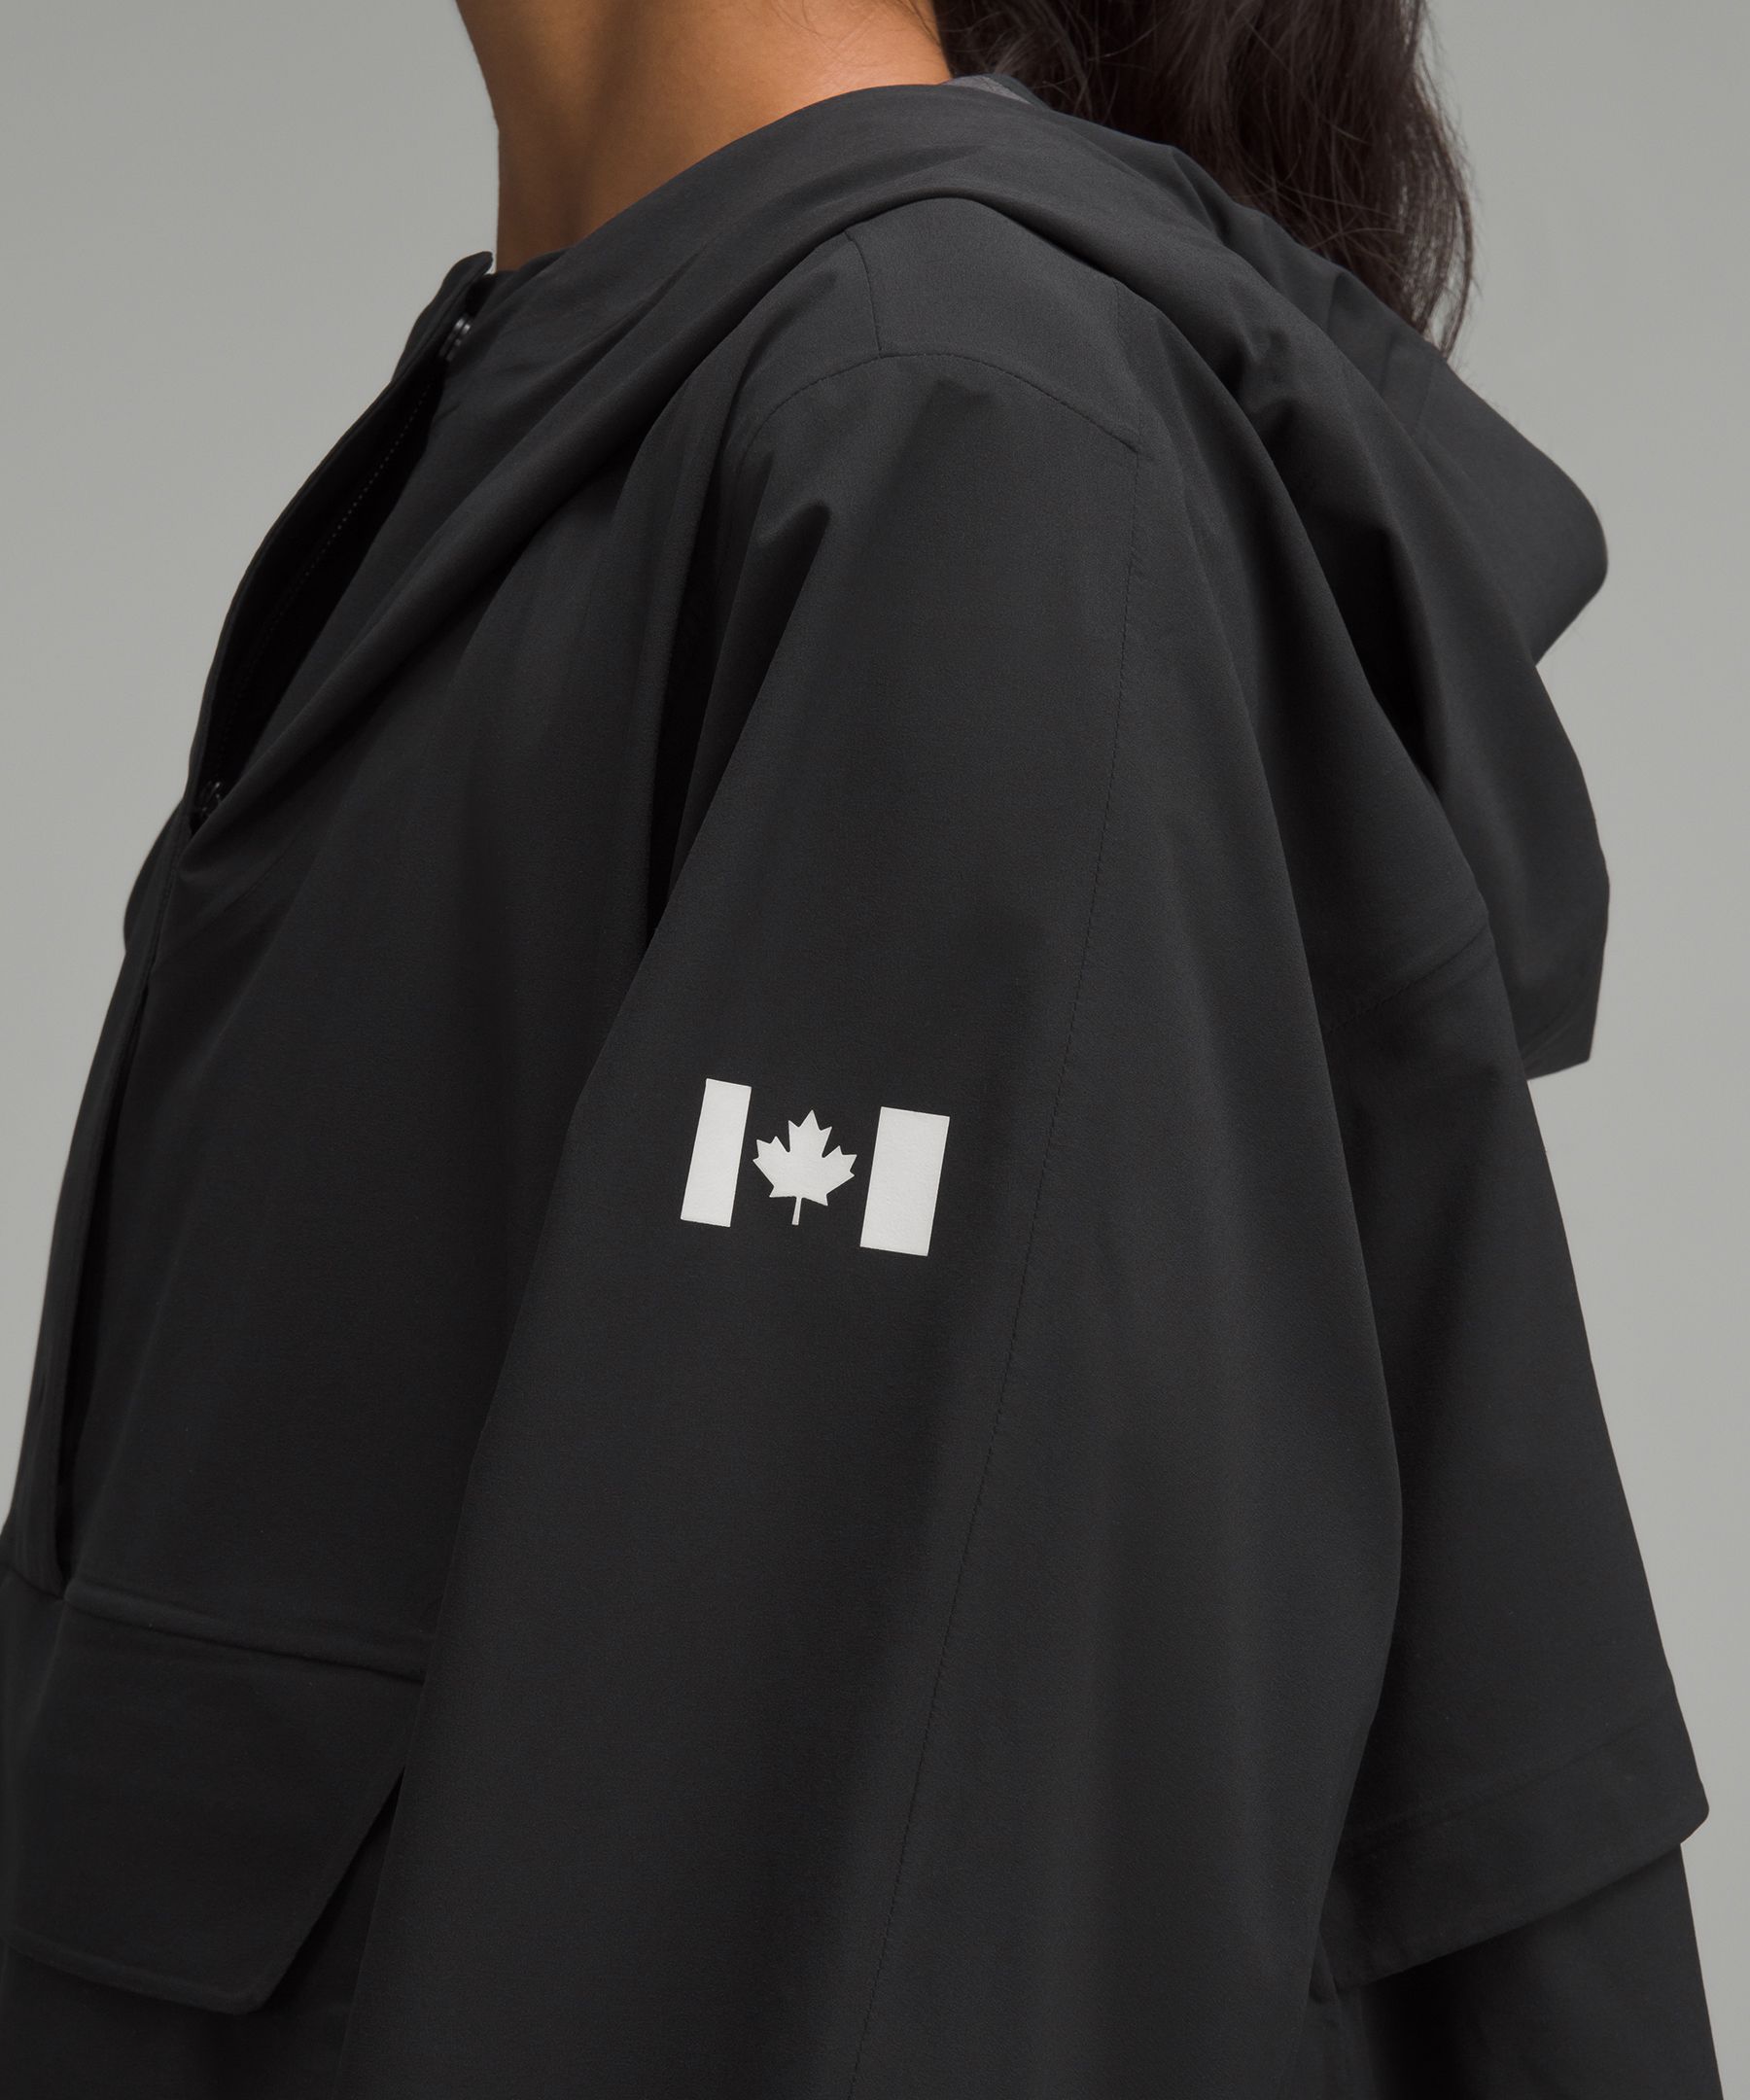 Team Canada Women's Seated-Fit Packable Rain Poncho *CPC Logo | Coats & Jackets